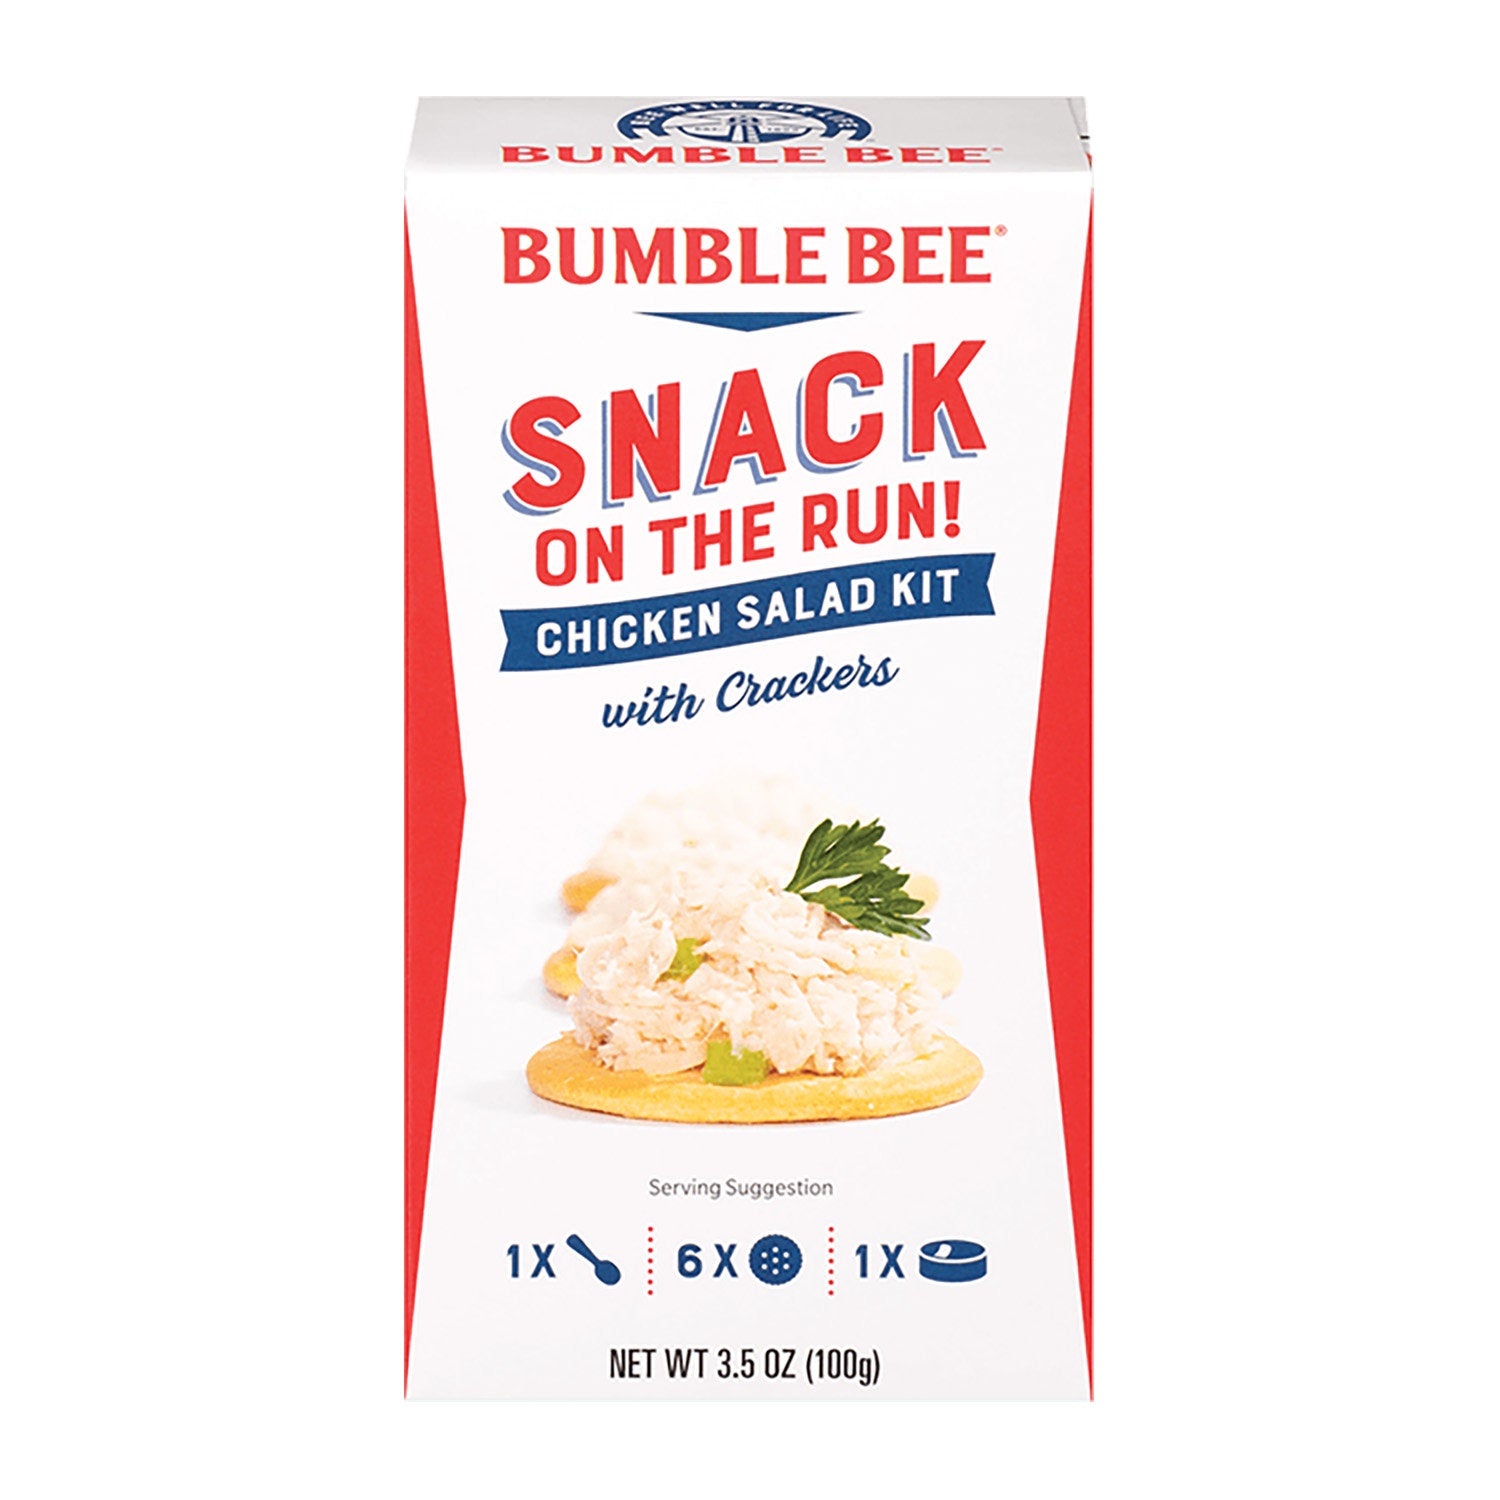 Bumble Bee Snack on the Run Chicken Salad Kit 3.5oz.